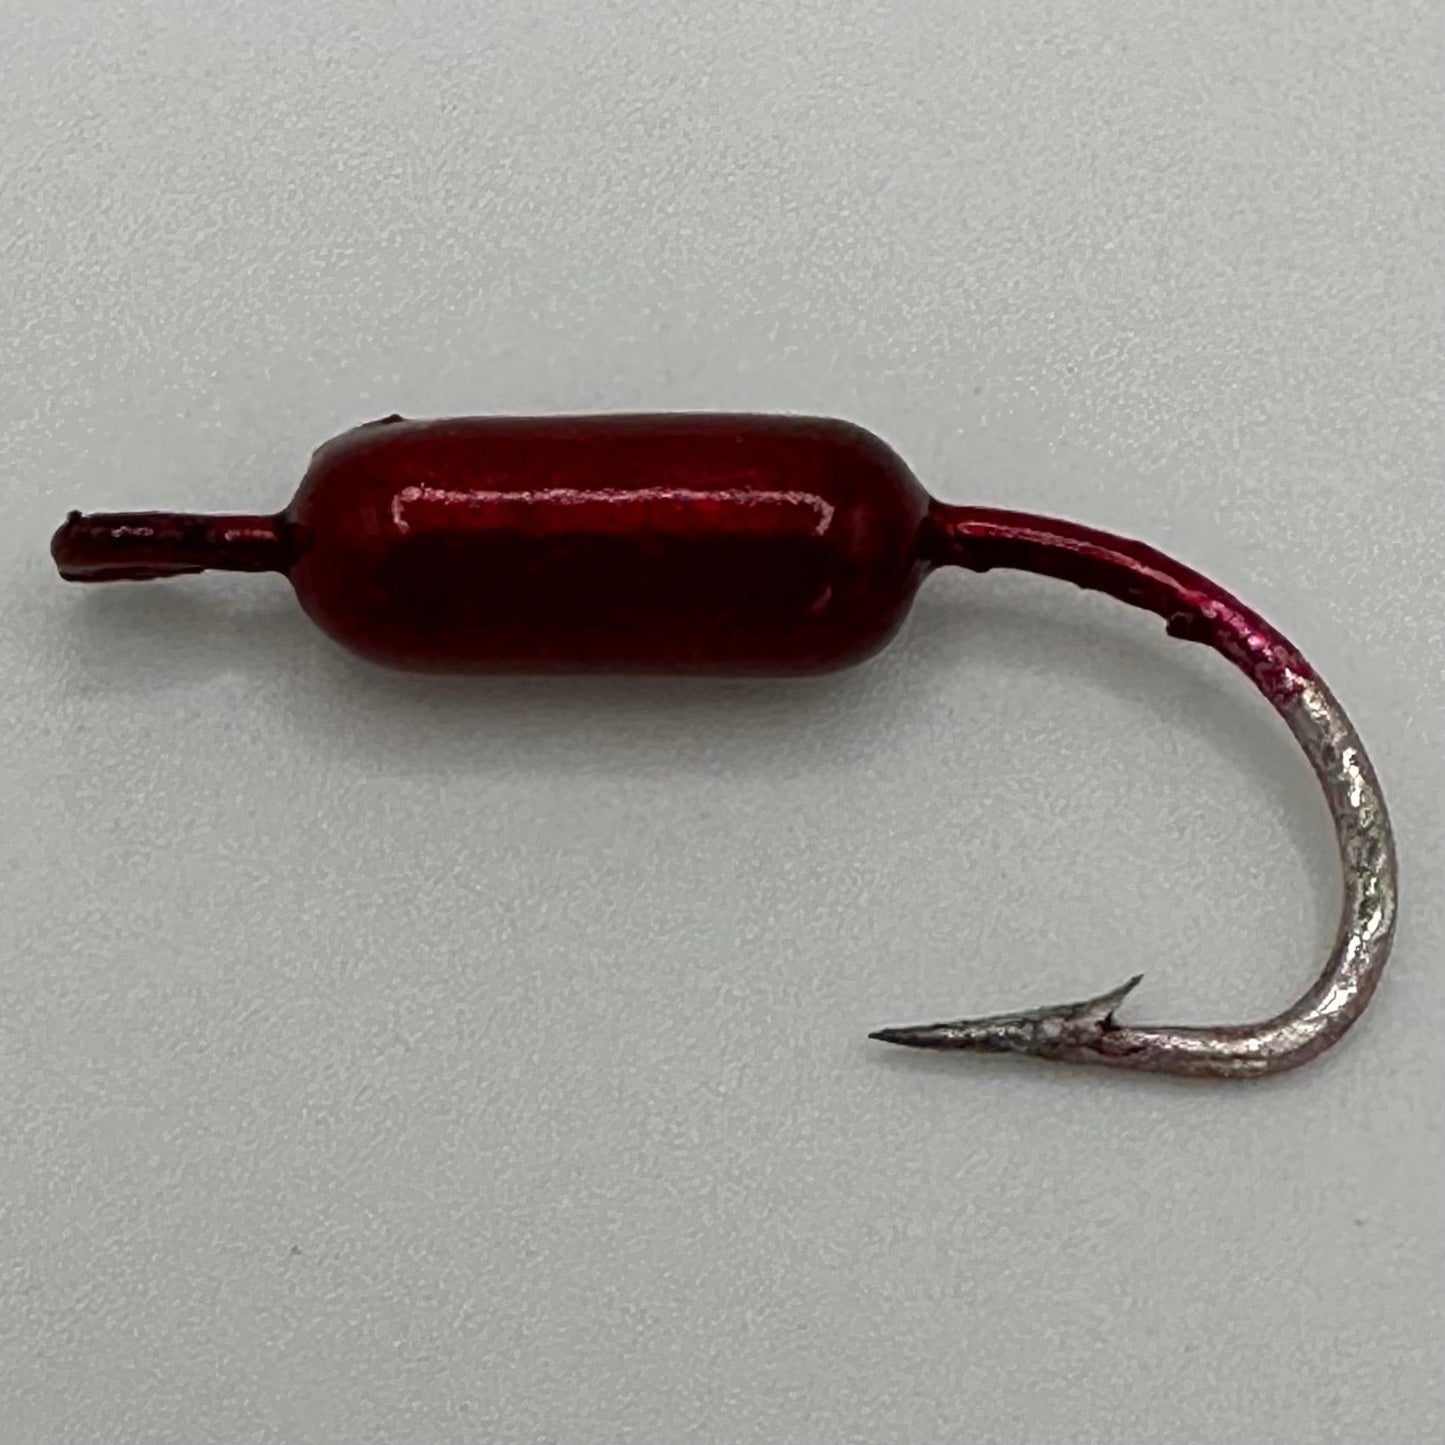 YELLOWTAIL SNAPPER JIG WITH 2/0 CIRCLE HOOKS 10PK available in every color